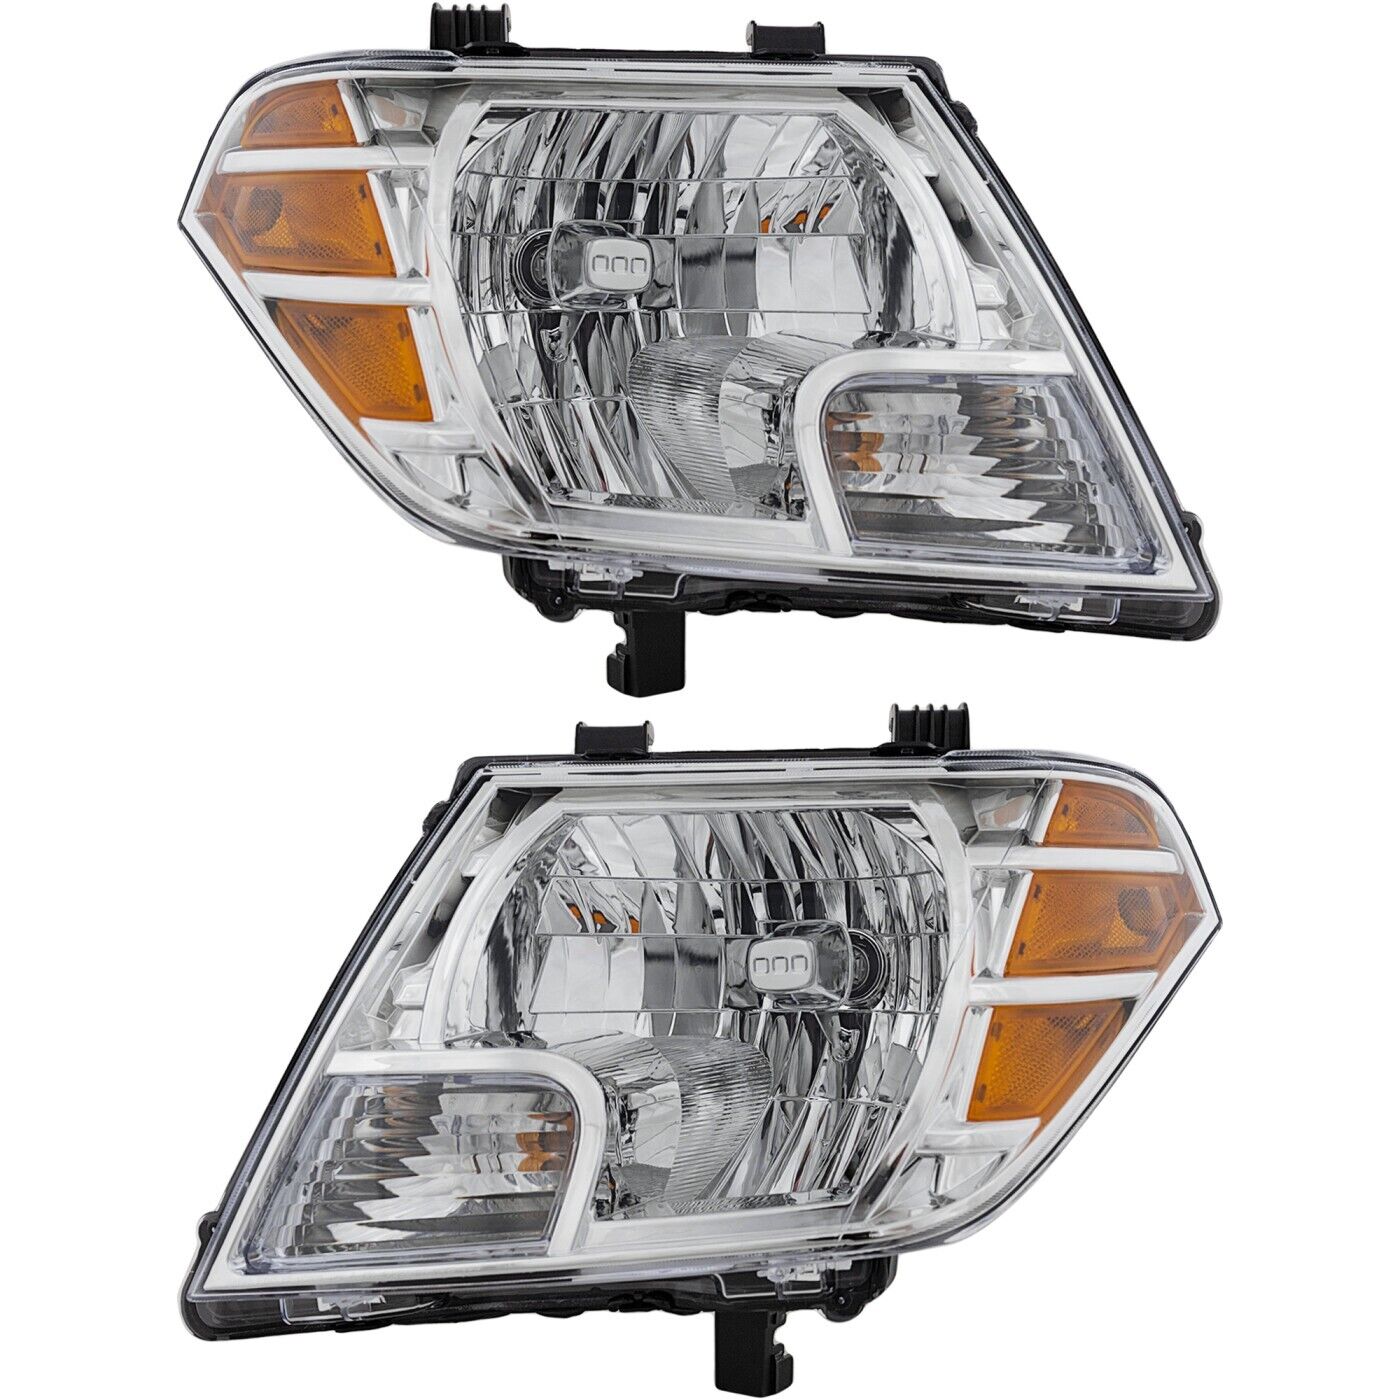 Headlight Headlamp Set For 2009-2021 Nissan Frontier Truck Left and Right Pair